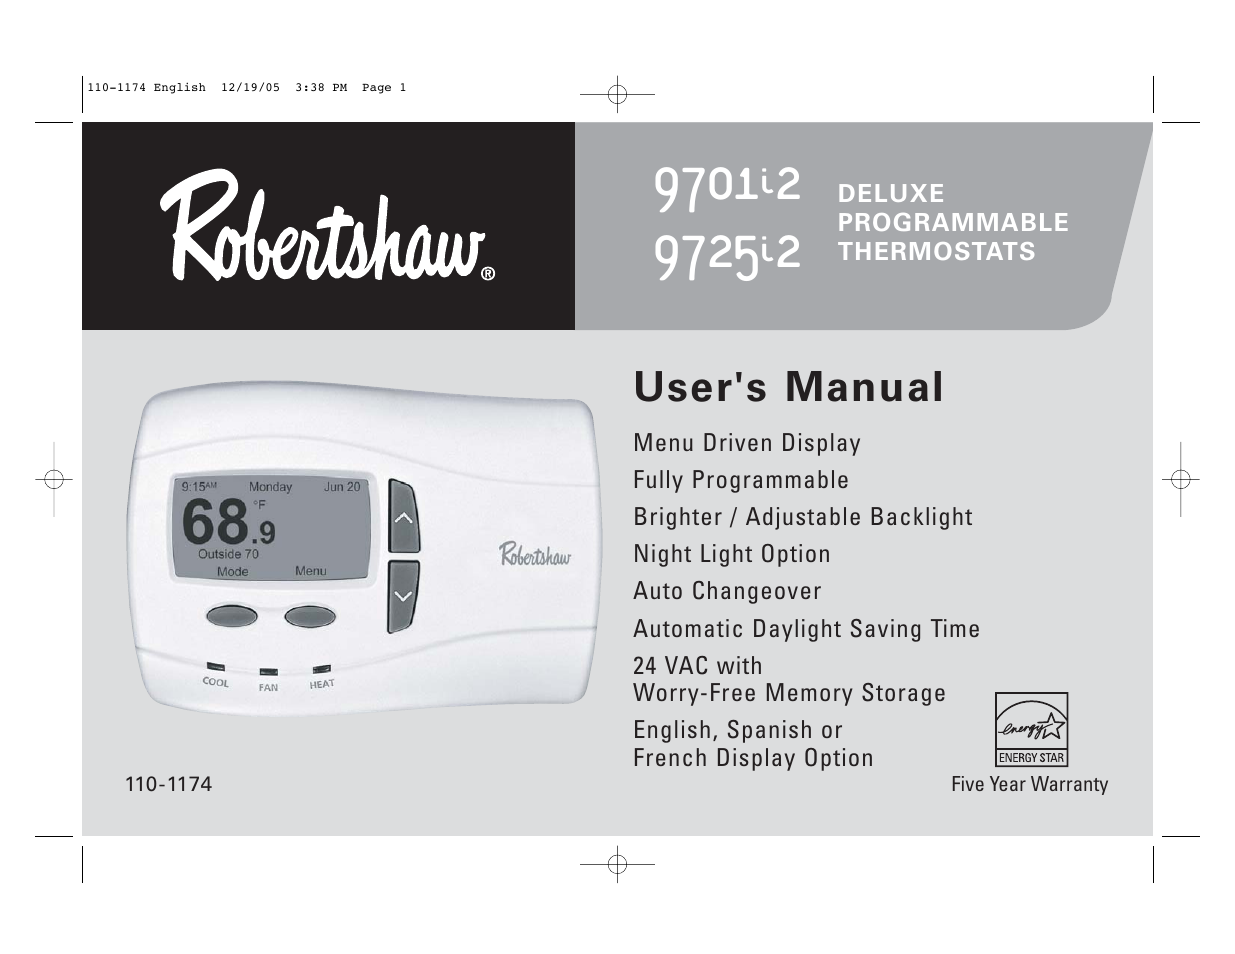 Robertshaw 9725i2 USERS MANUAL User Manual | 32 pages | Also for: 9701i2 USERS MANUAL